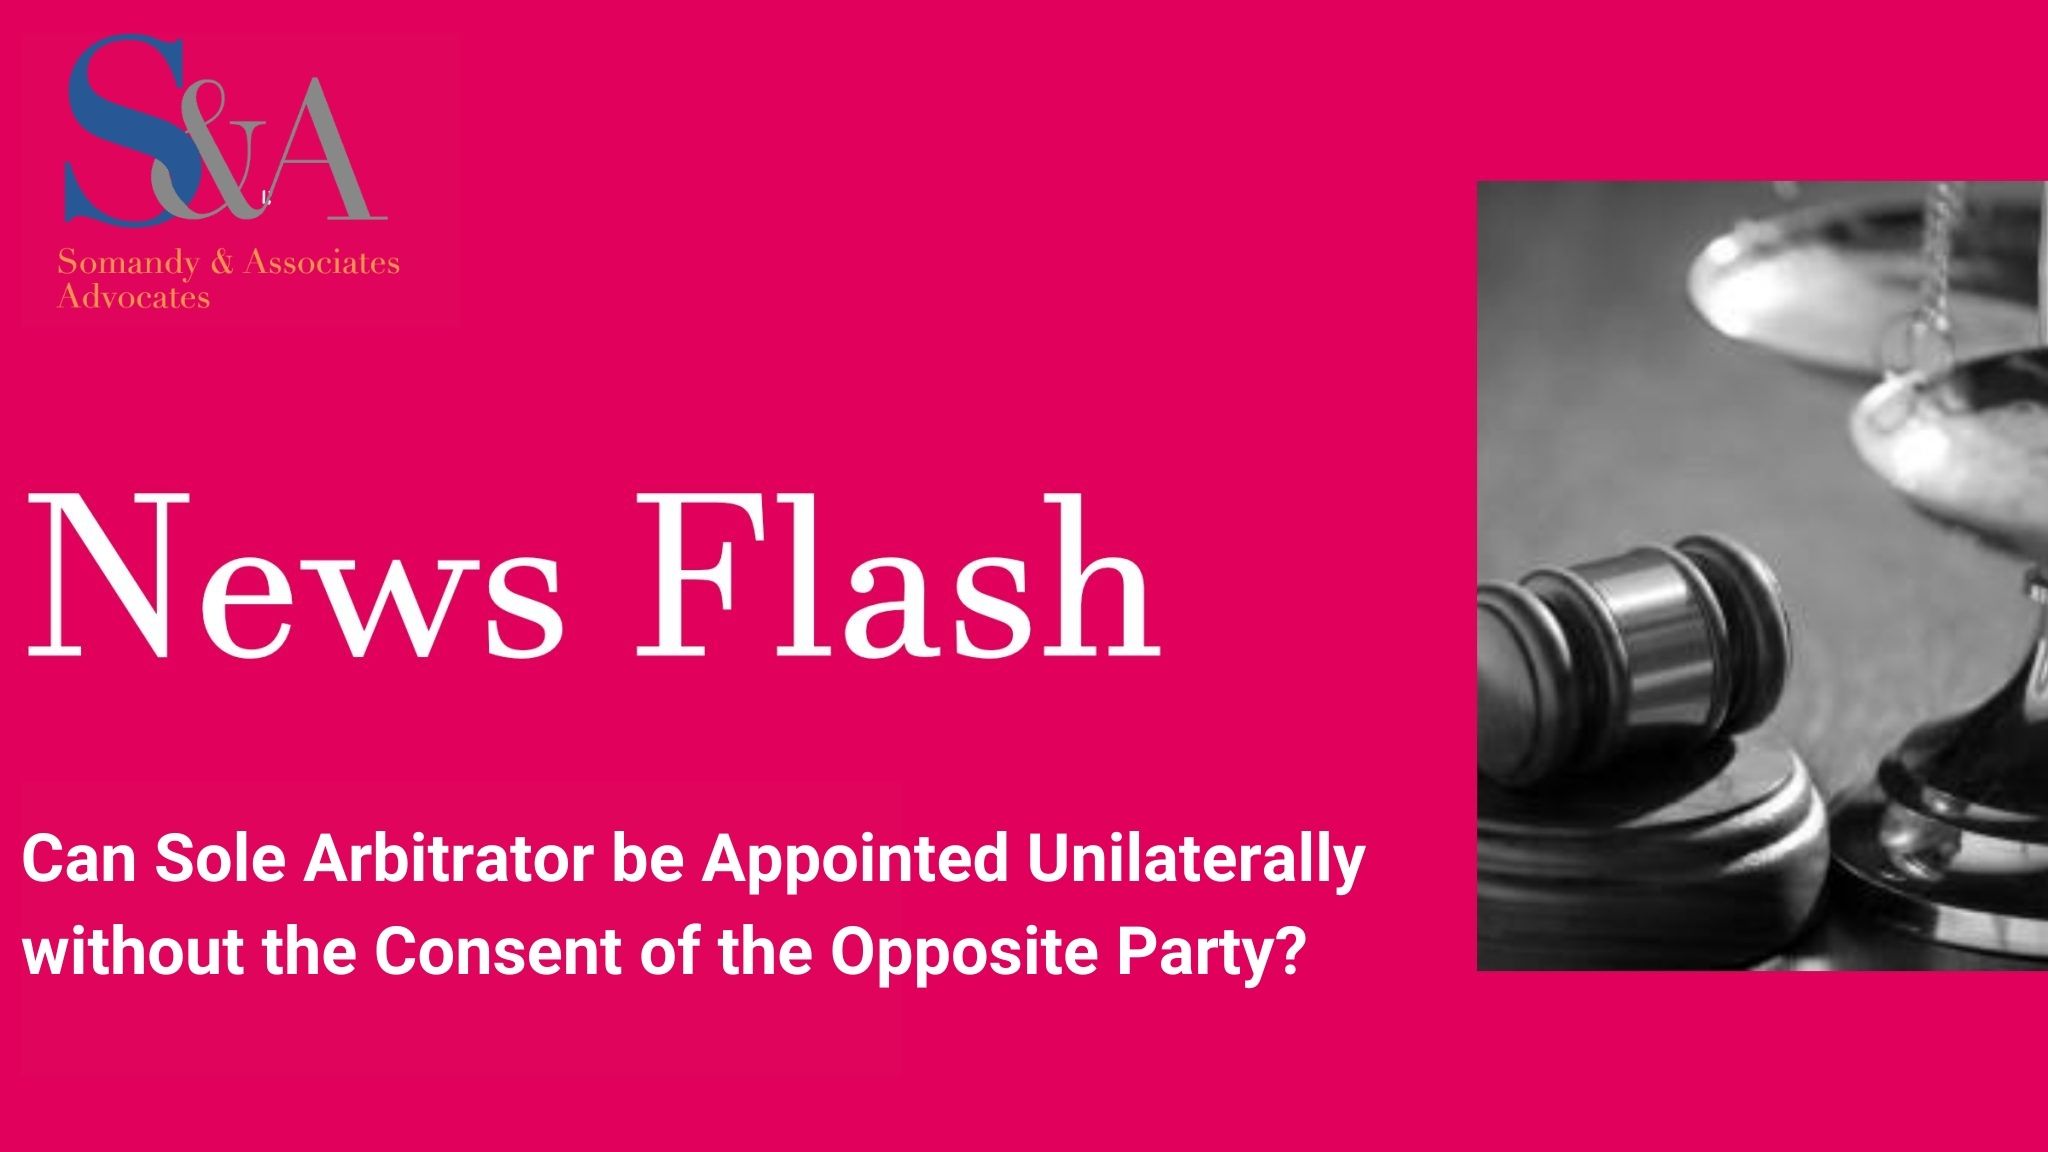 Can Sole Arbitrator be Appointed Unilaterally without the Consent of the Opposite Party?